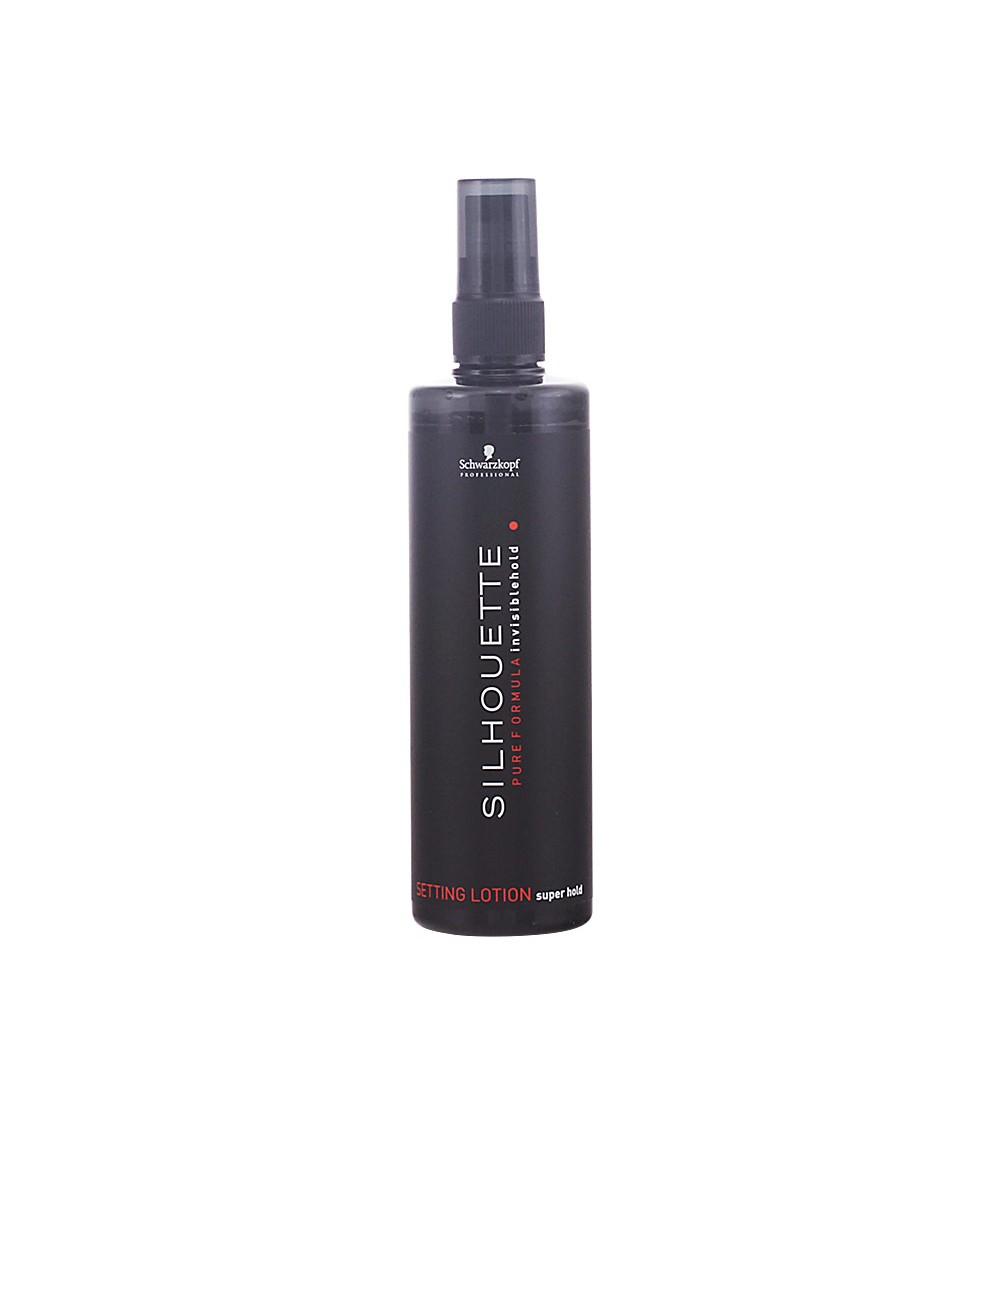 SILHOUETTE EXTRA STRONG lotion 200 ml